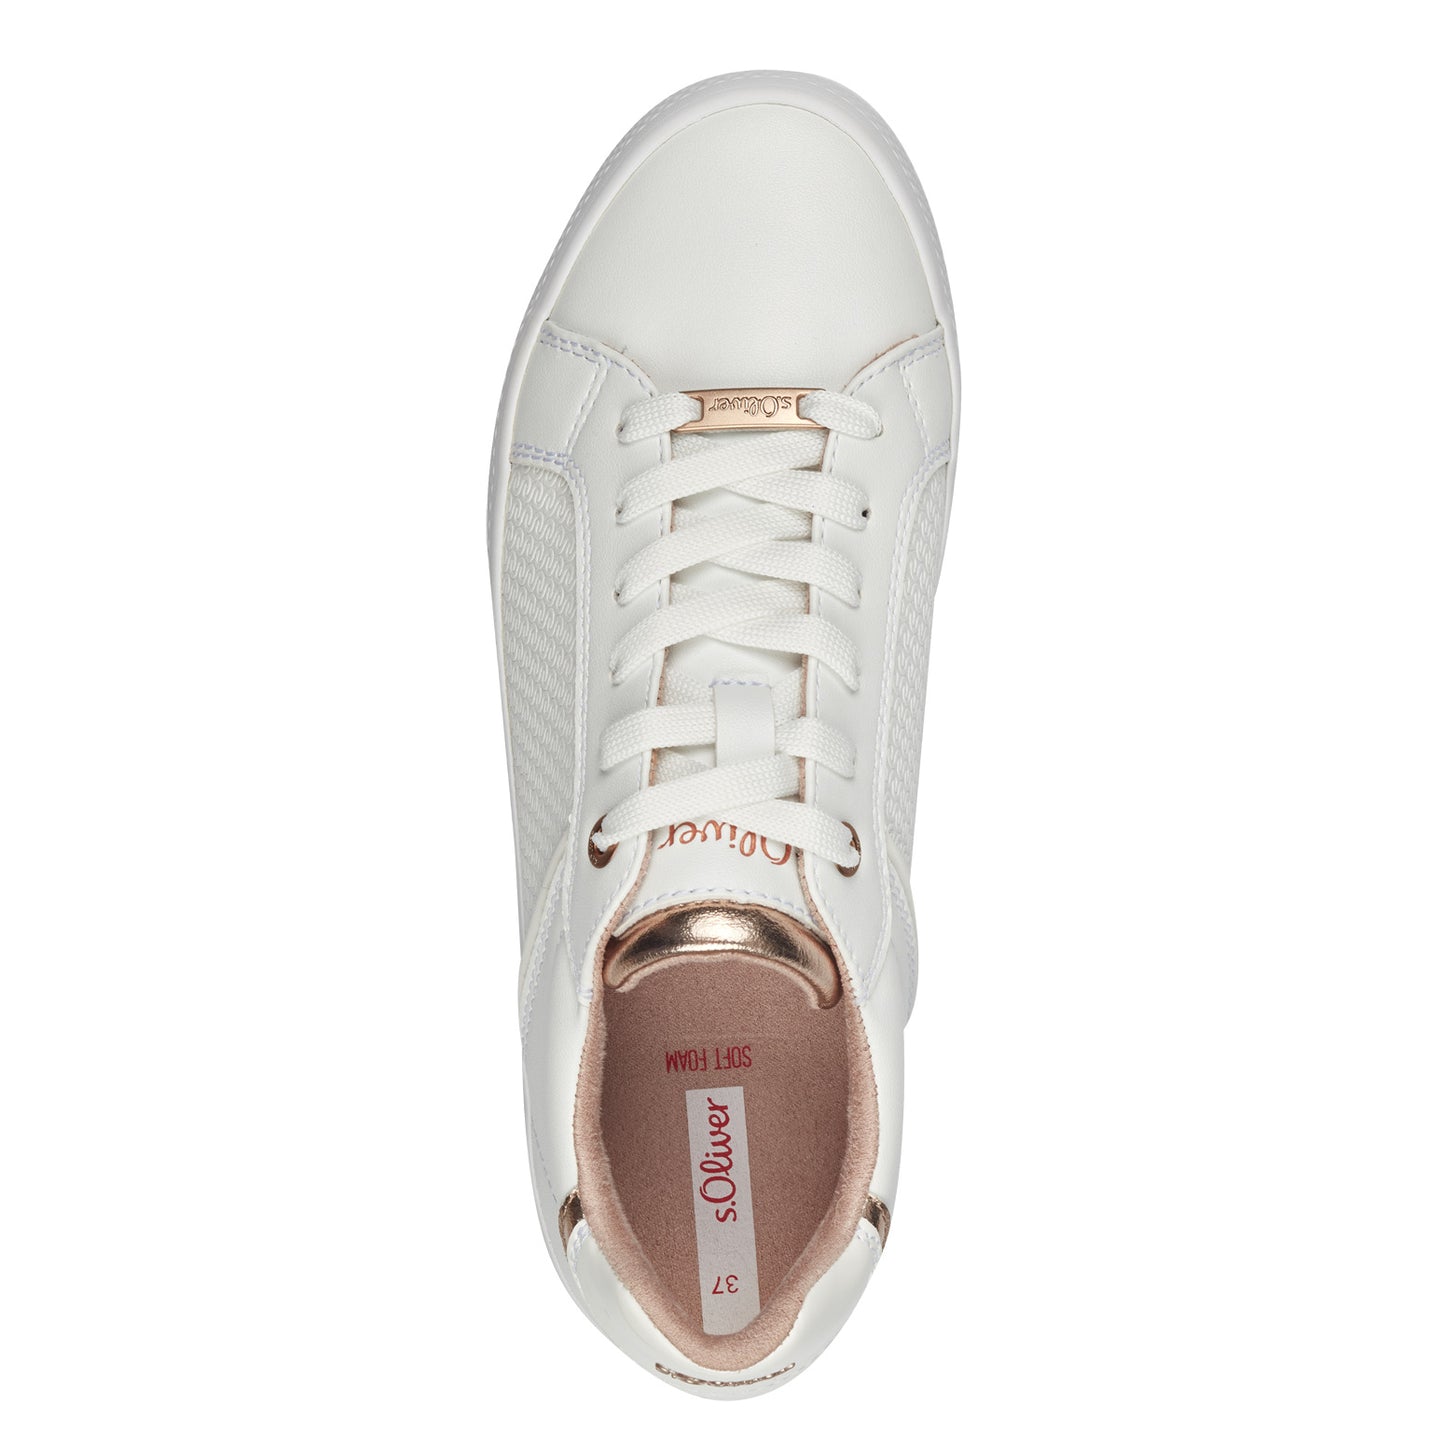 S.oliver - Ladies Shoes Trainers White (2010)